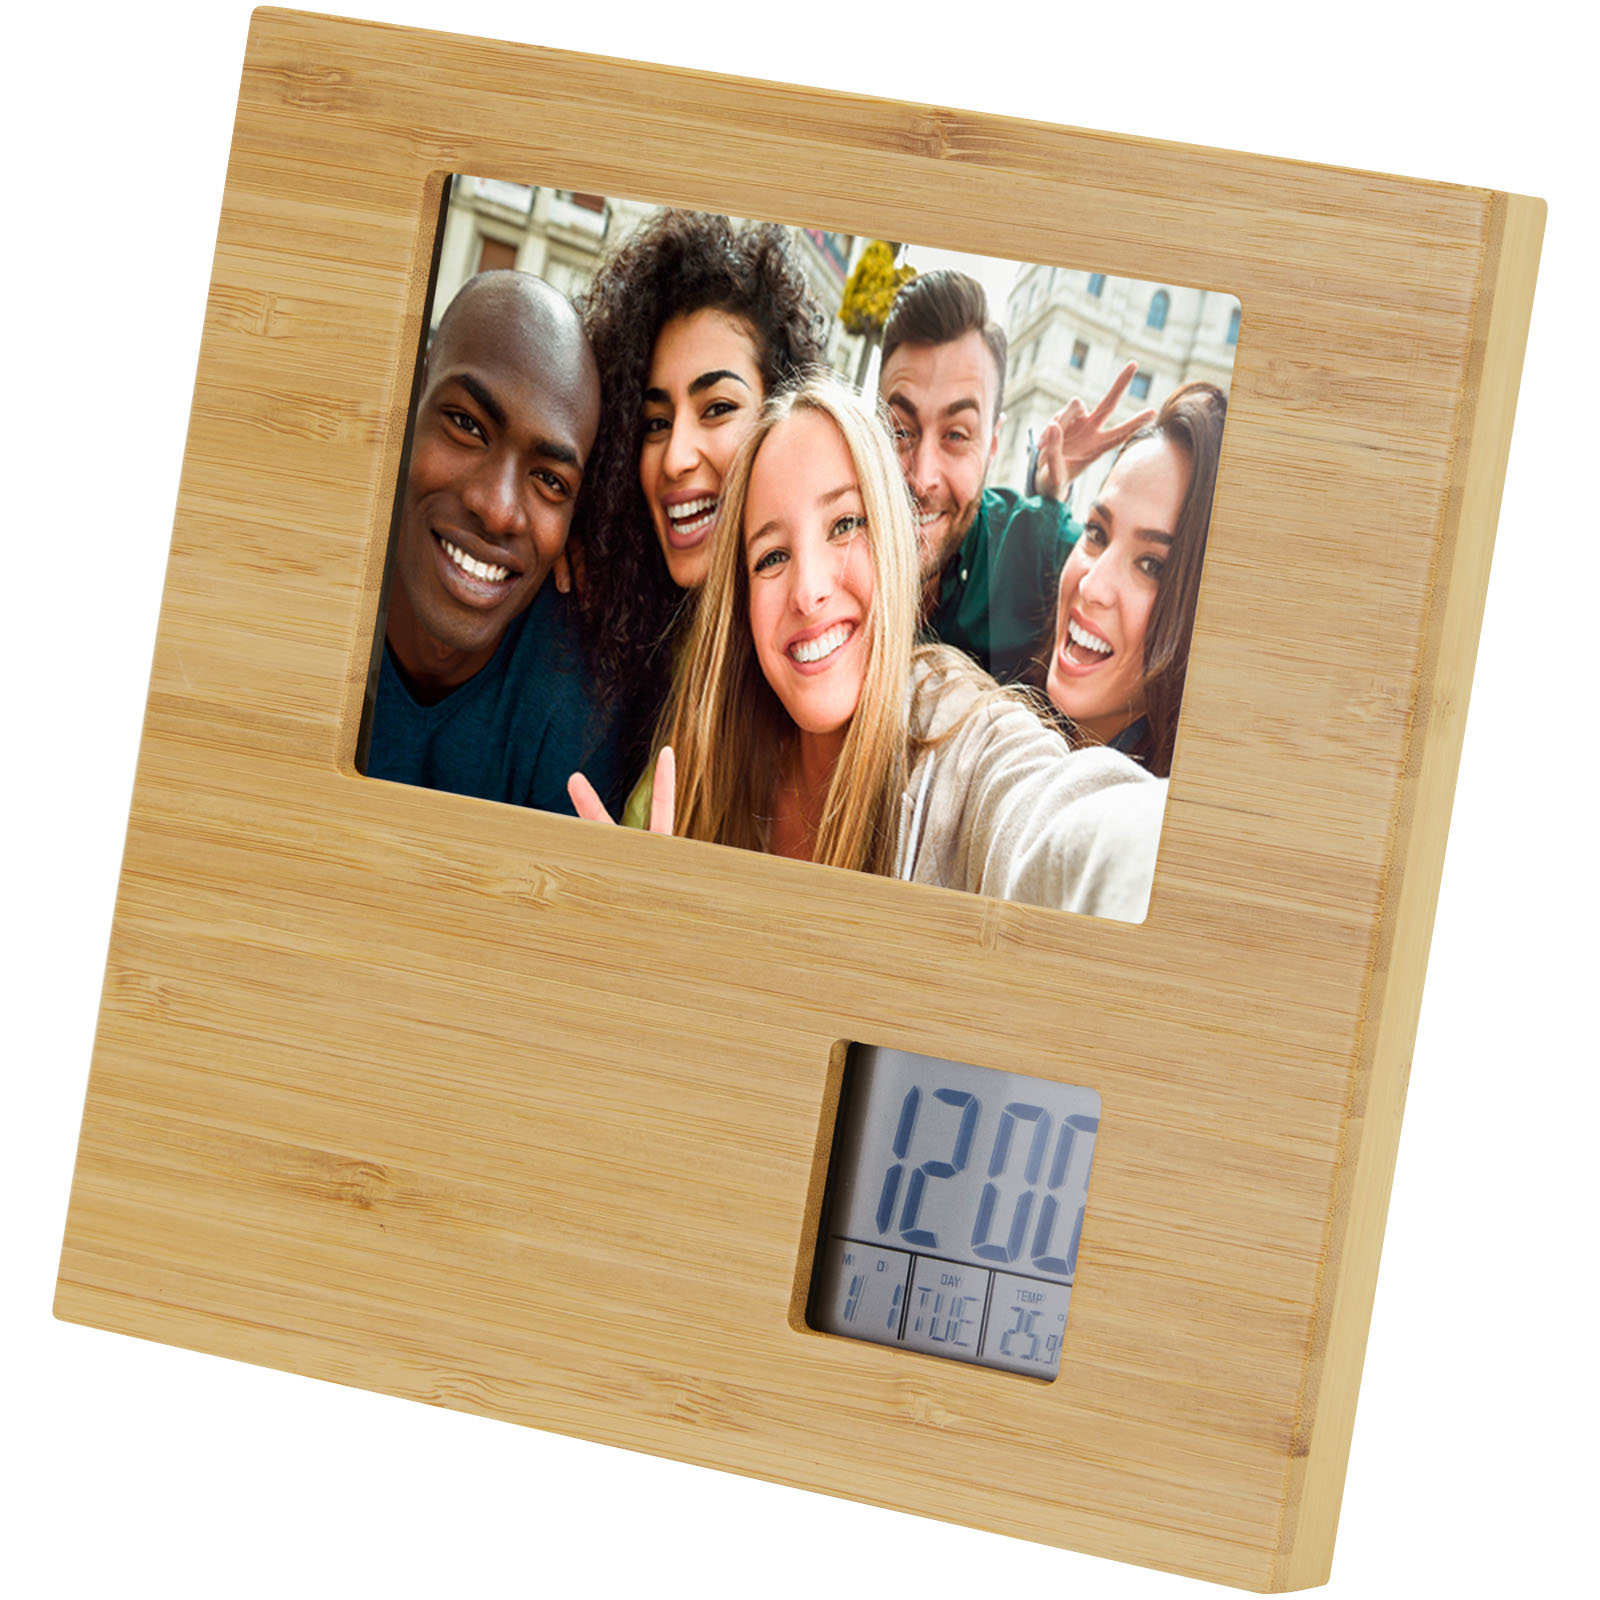 Home & Kitchen - Sasa bamboo photo frame with thermometer